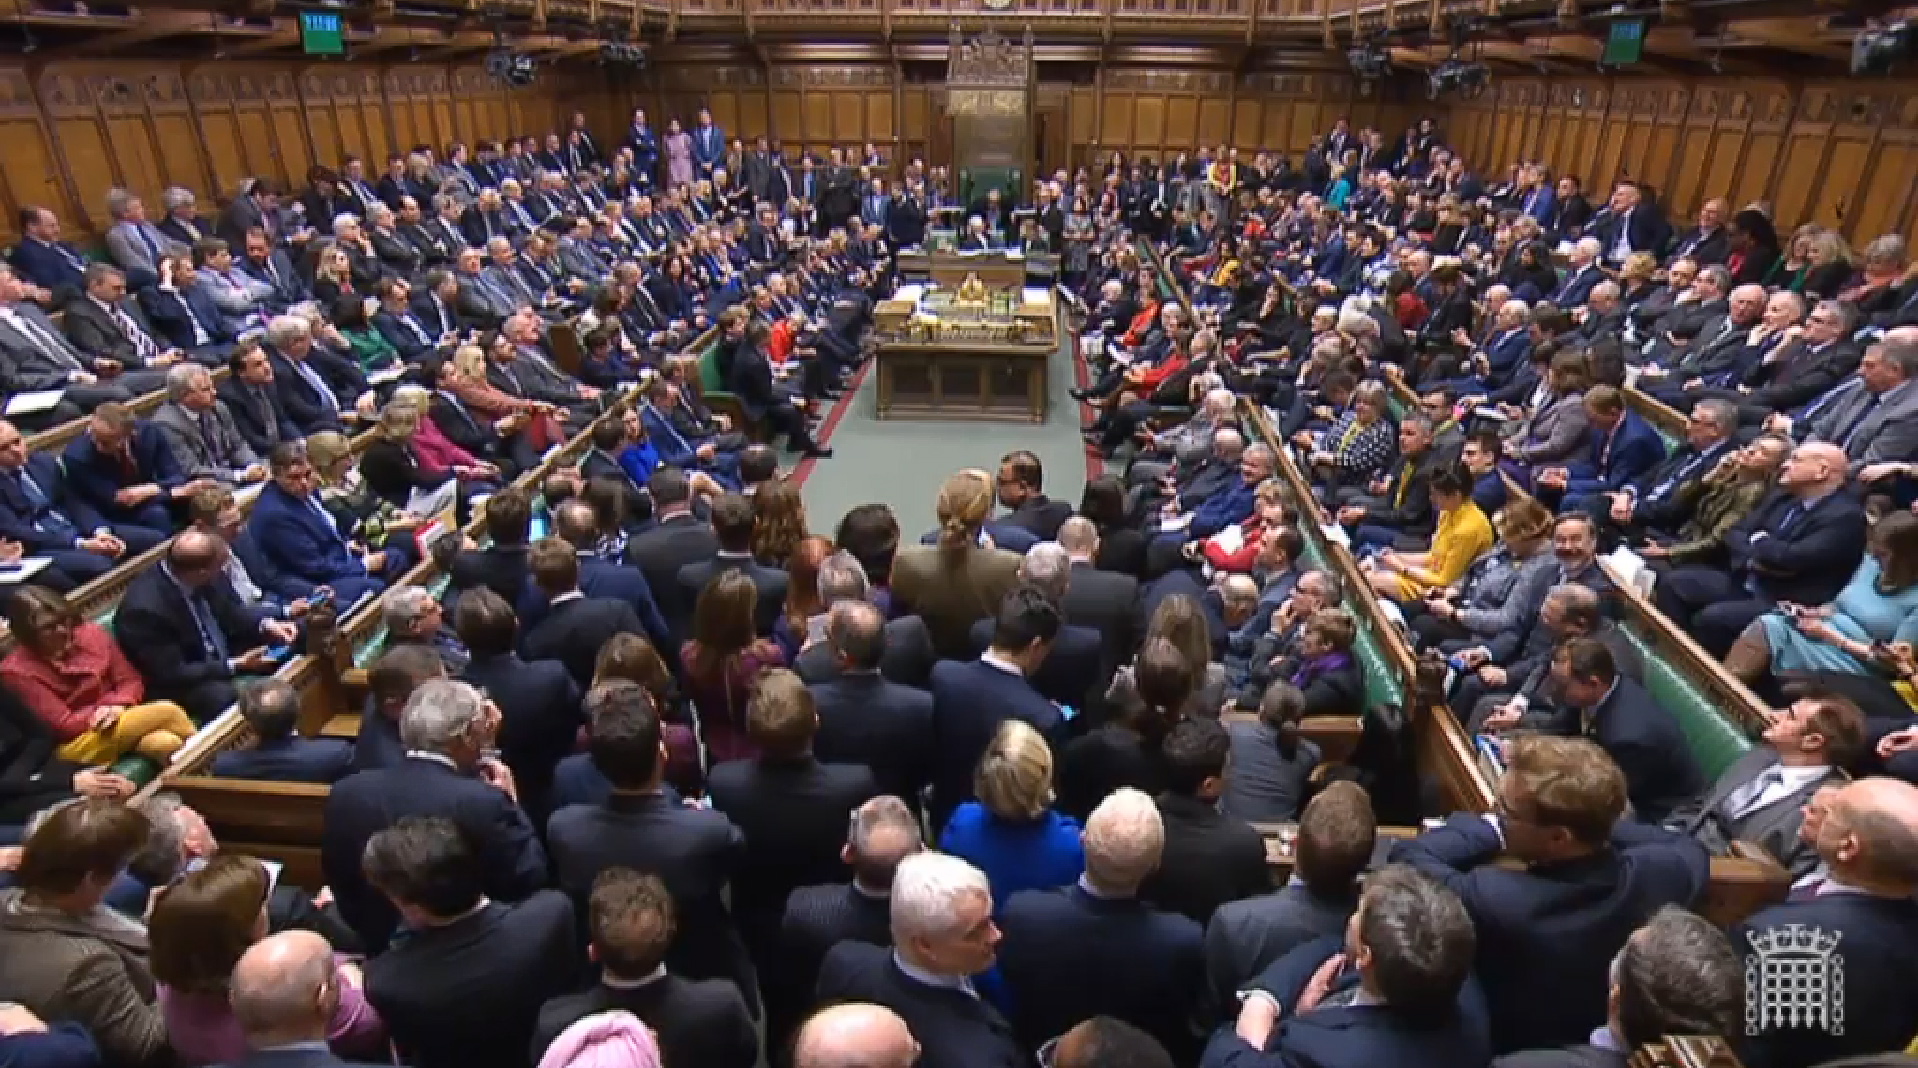 epa07432020 A grab from a handout video made available by the UK Parliamentary Recording Unit shows Members of Parliament after voting at the House of Commons parliament in London, Britain, 12 March 2019 on British Prime Minister May's amended Brexit. Theresa May wants parliament to back her 'improved' withdrawalk agreement she has negotiated with the EU over the so-called 'backstop'. The United Kingdom is officially due to leave the European Union on 29 March 2019, two years after triggering Article 50 in consequence to a referendum.  EPA/UK PARLIAMENTARY RECORDING UNIT / HANDOUT MANDATORY CREDIT: UK PARLIAMENTARY RECORDING UNIT HANDOUT EDITORIAL USE ONLY/NO SALES HANDOUT EDITORIAL USE ONLY/NO SALES HANDOUT EDITORIAL USE ONLY/NO SALES